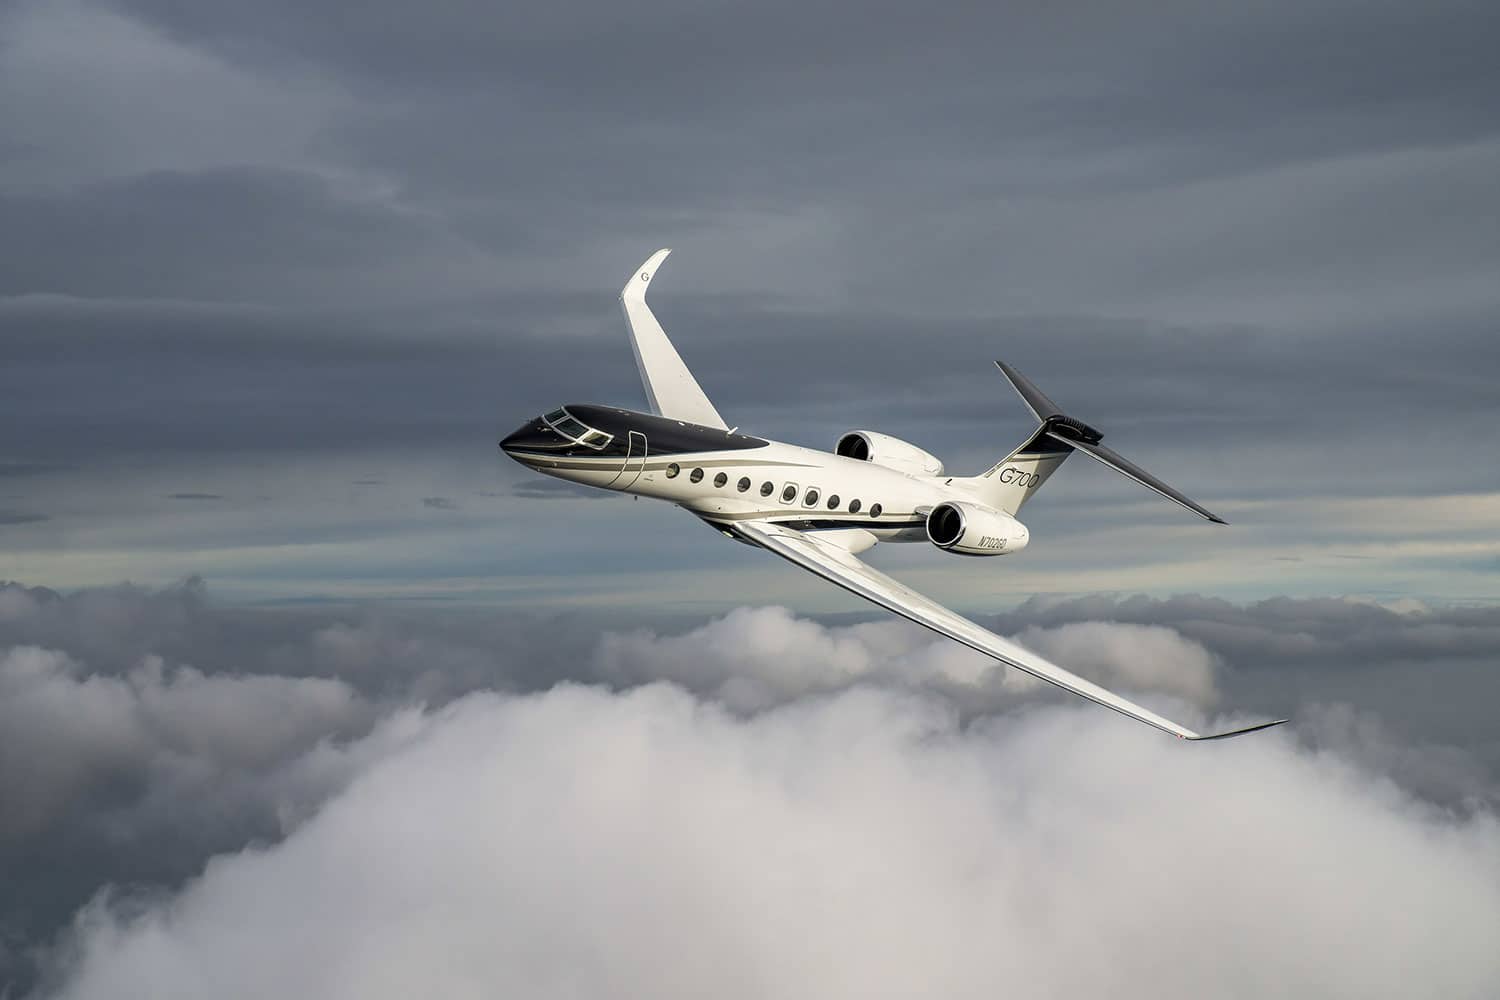 All-new Gulfstream G700 has received Federal Aviation Administration (FAA) type certification.